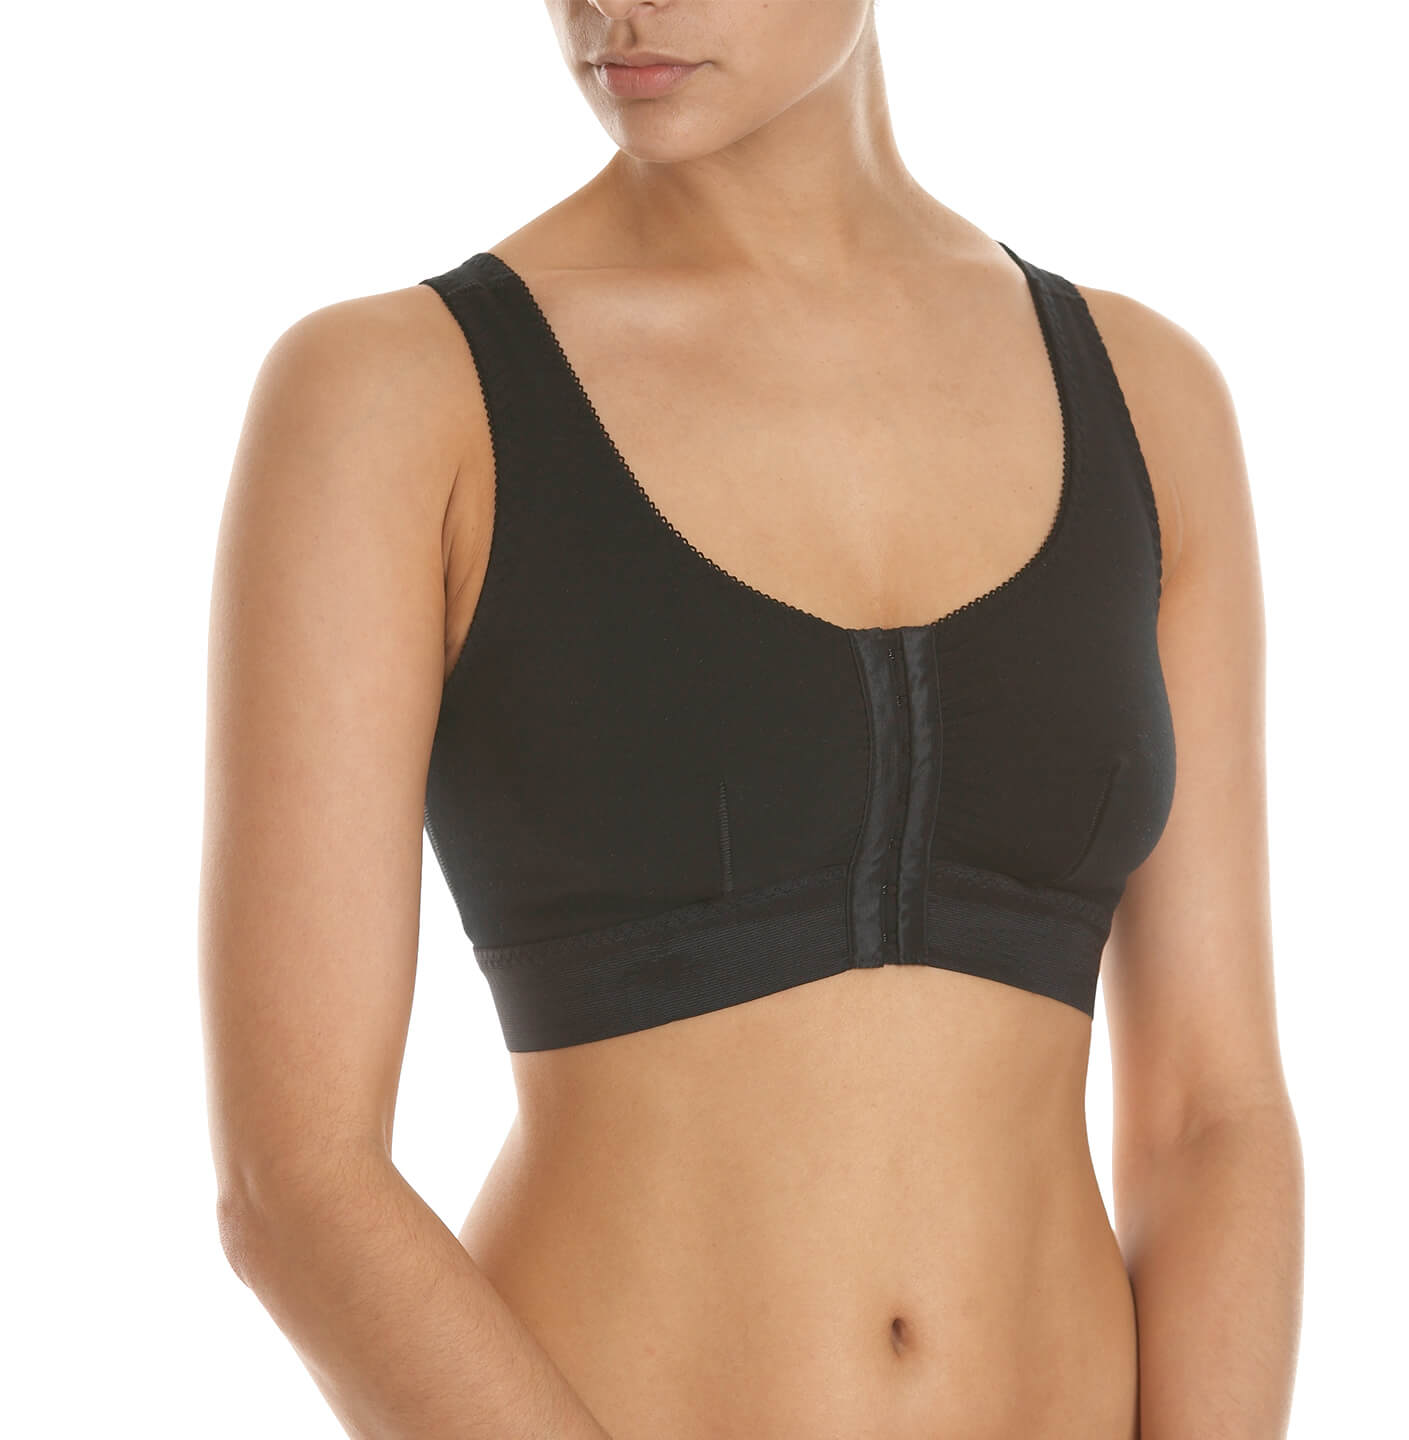 Surgical Bra with Underbust Support, Br1